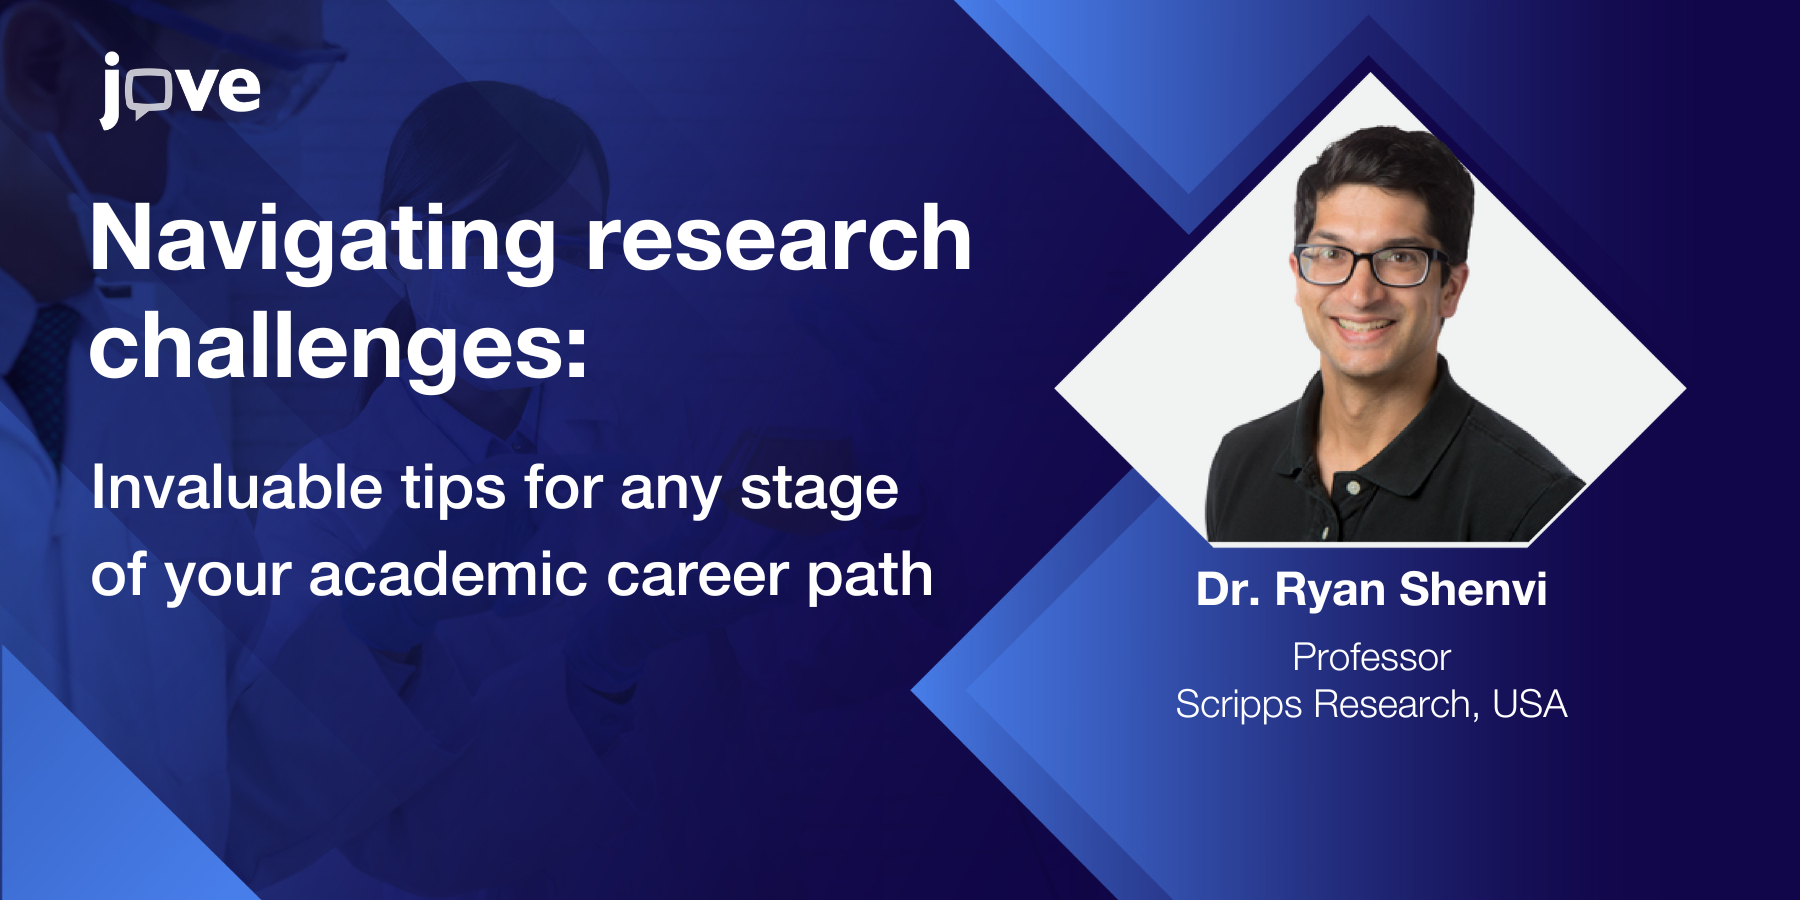 Navigating research challenges: Invaluable tips for any stage of your academic career path